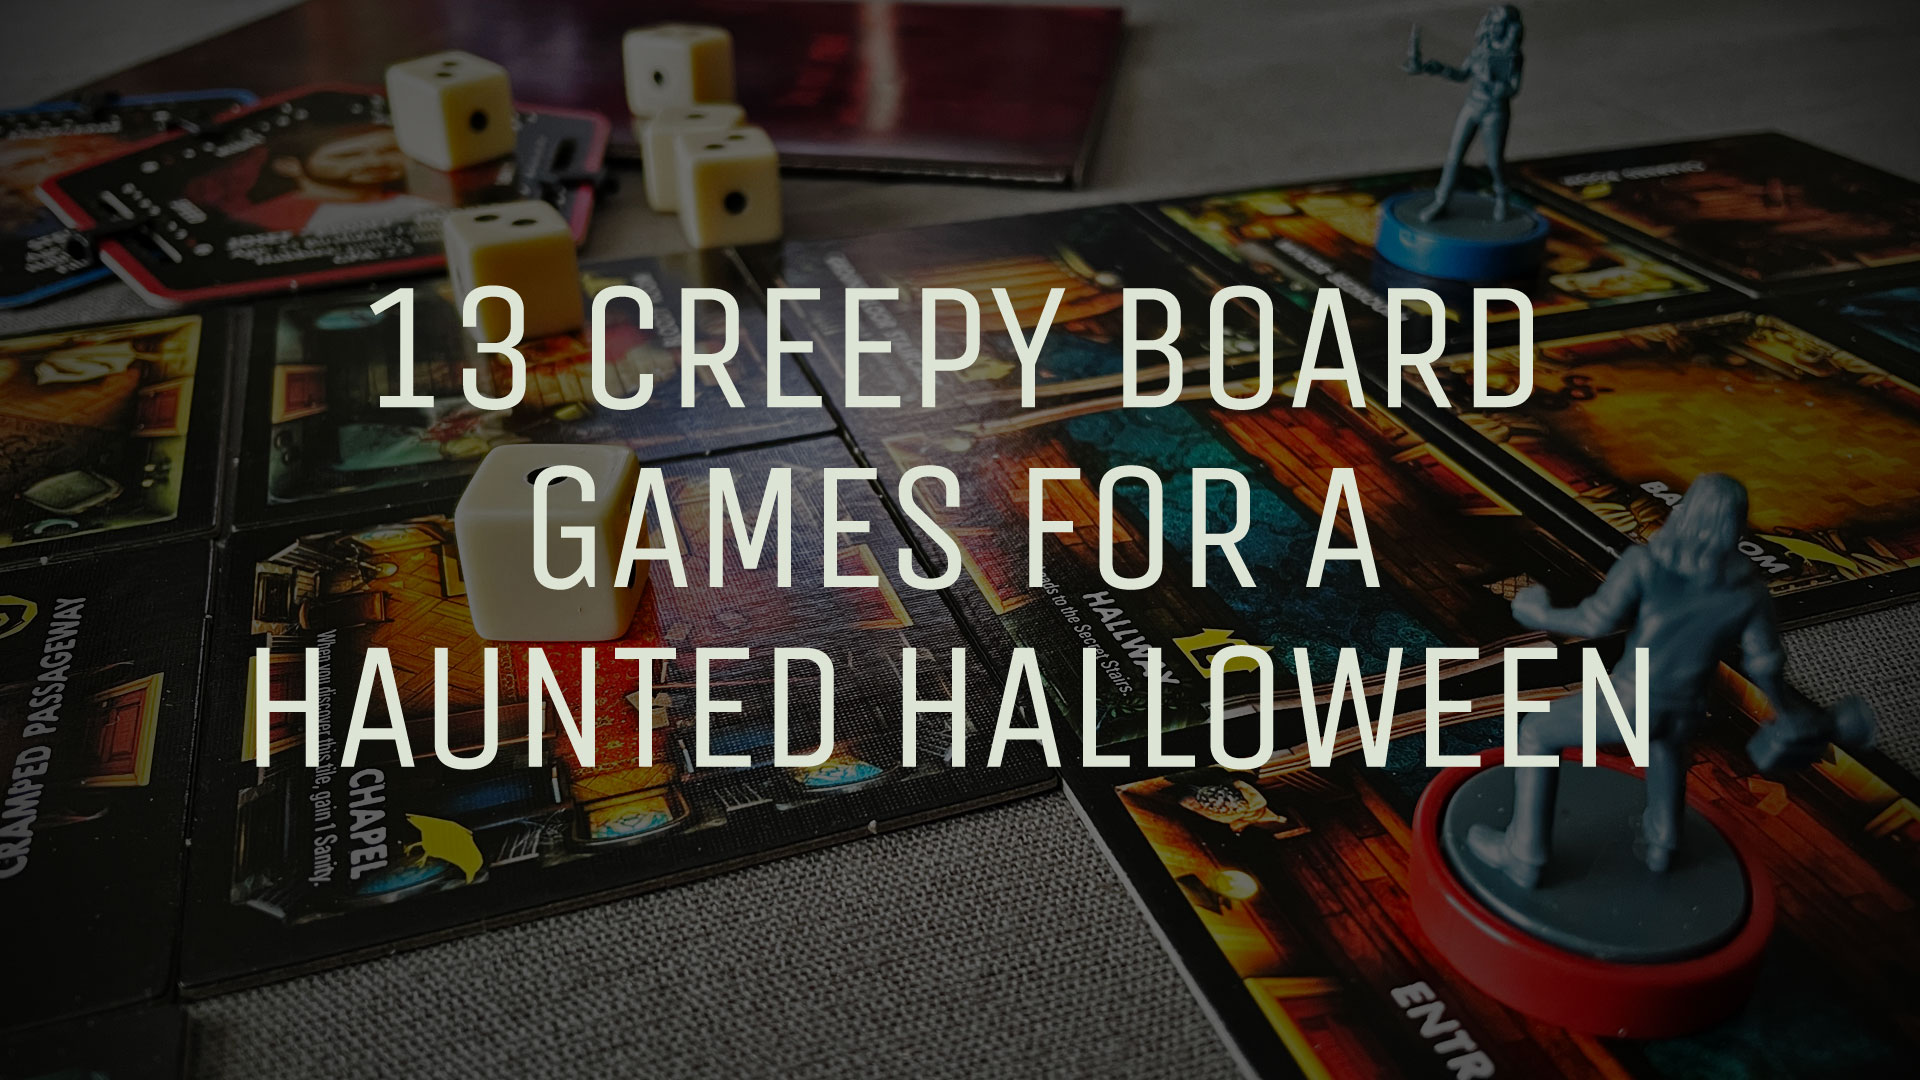 13 Creepy Board Games for a Haunted Halloween 2022 Image